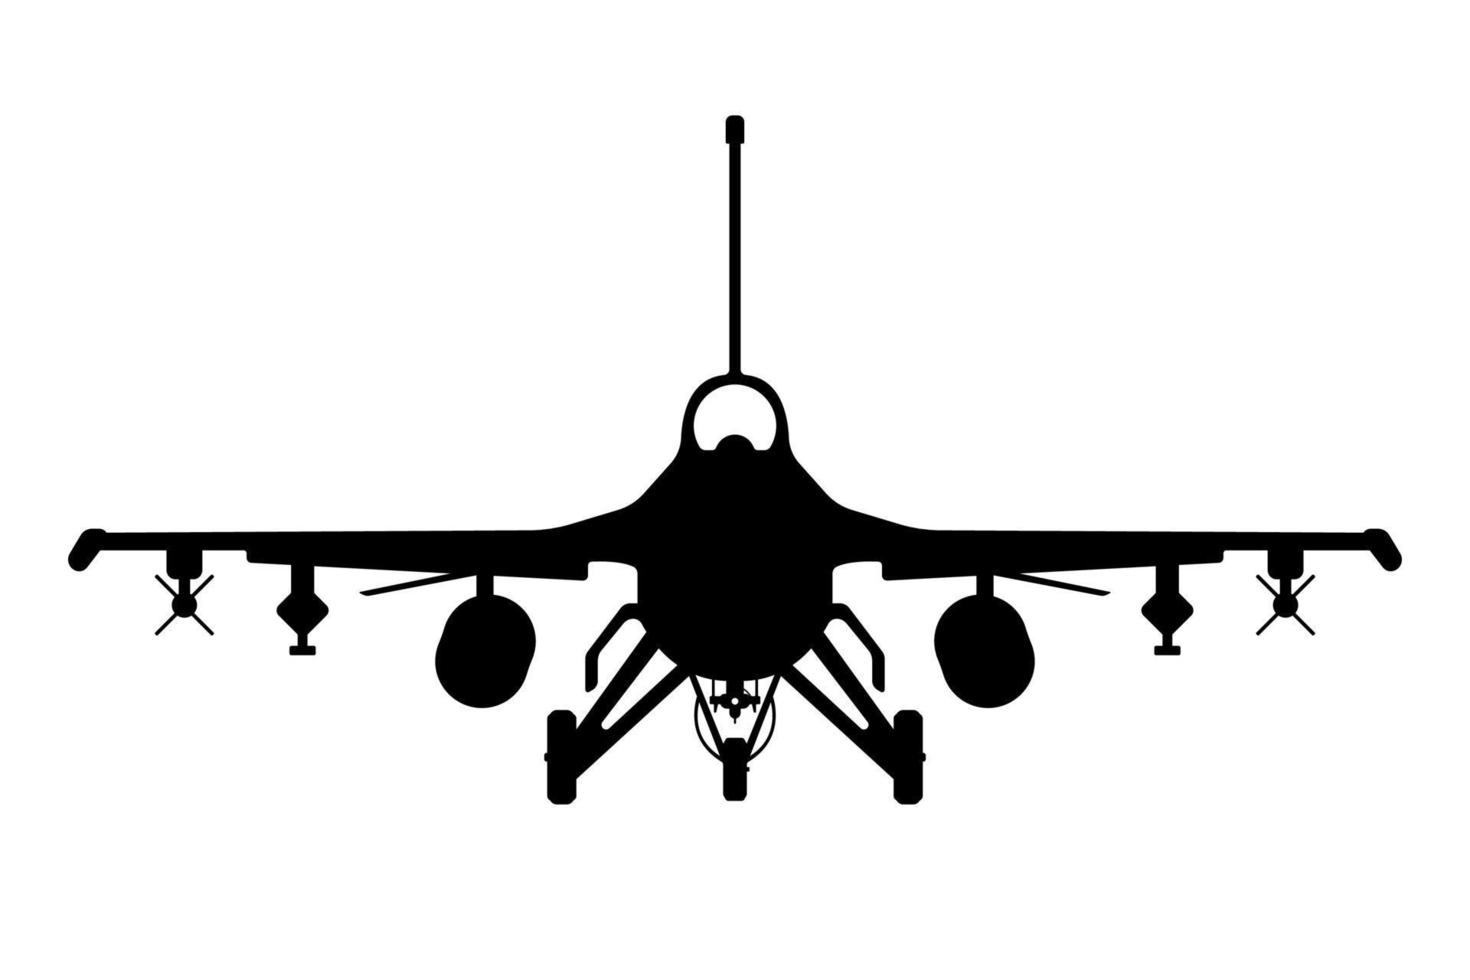 Air Force Fighting Falcon Silhouette, Aircraft Army Weapon Illustration. vector